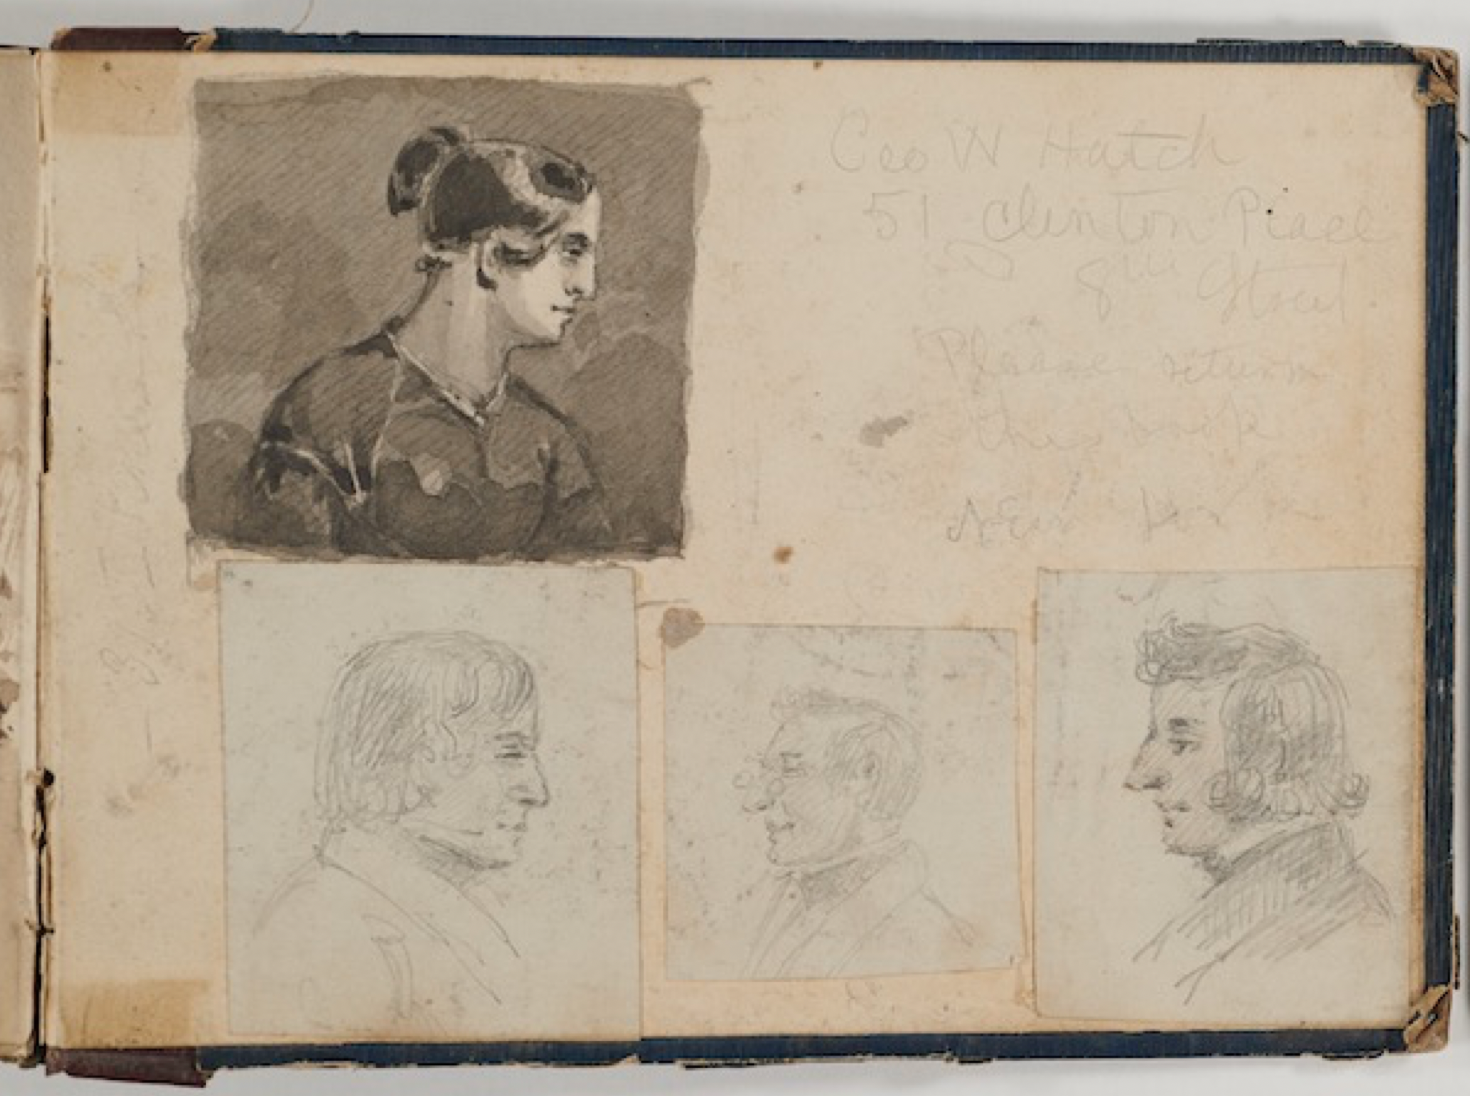 George Whitehead Hatch (American, 1805-1867), Sketchbook, 1844, graphite, sepia, watercolor and ink on paper, blue cover with brown binding, 4-3/4 x 6-11/16 x 9/16 inches. The John Driscoll American Drawings Collection, 2018.144